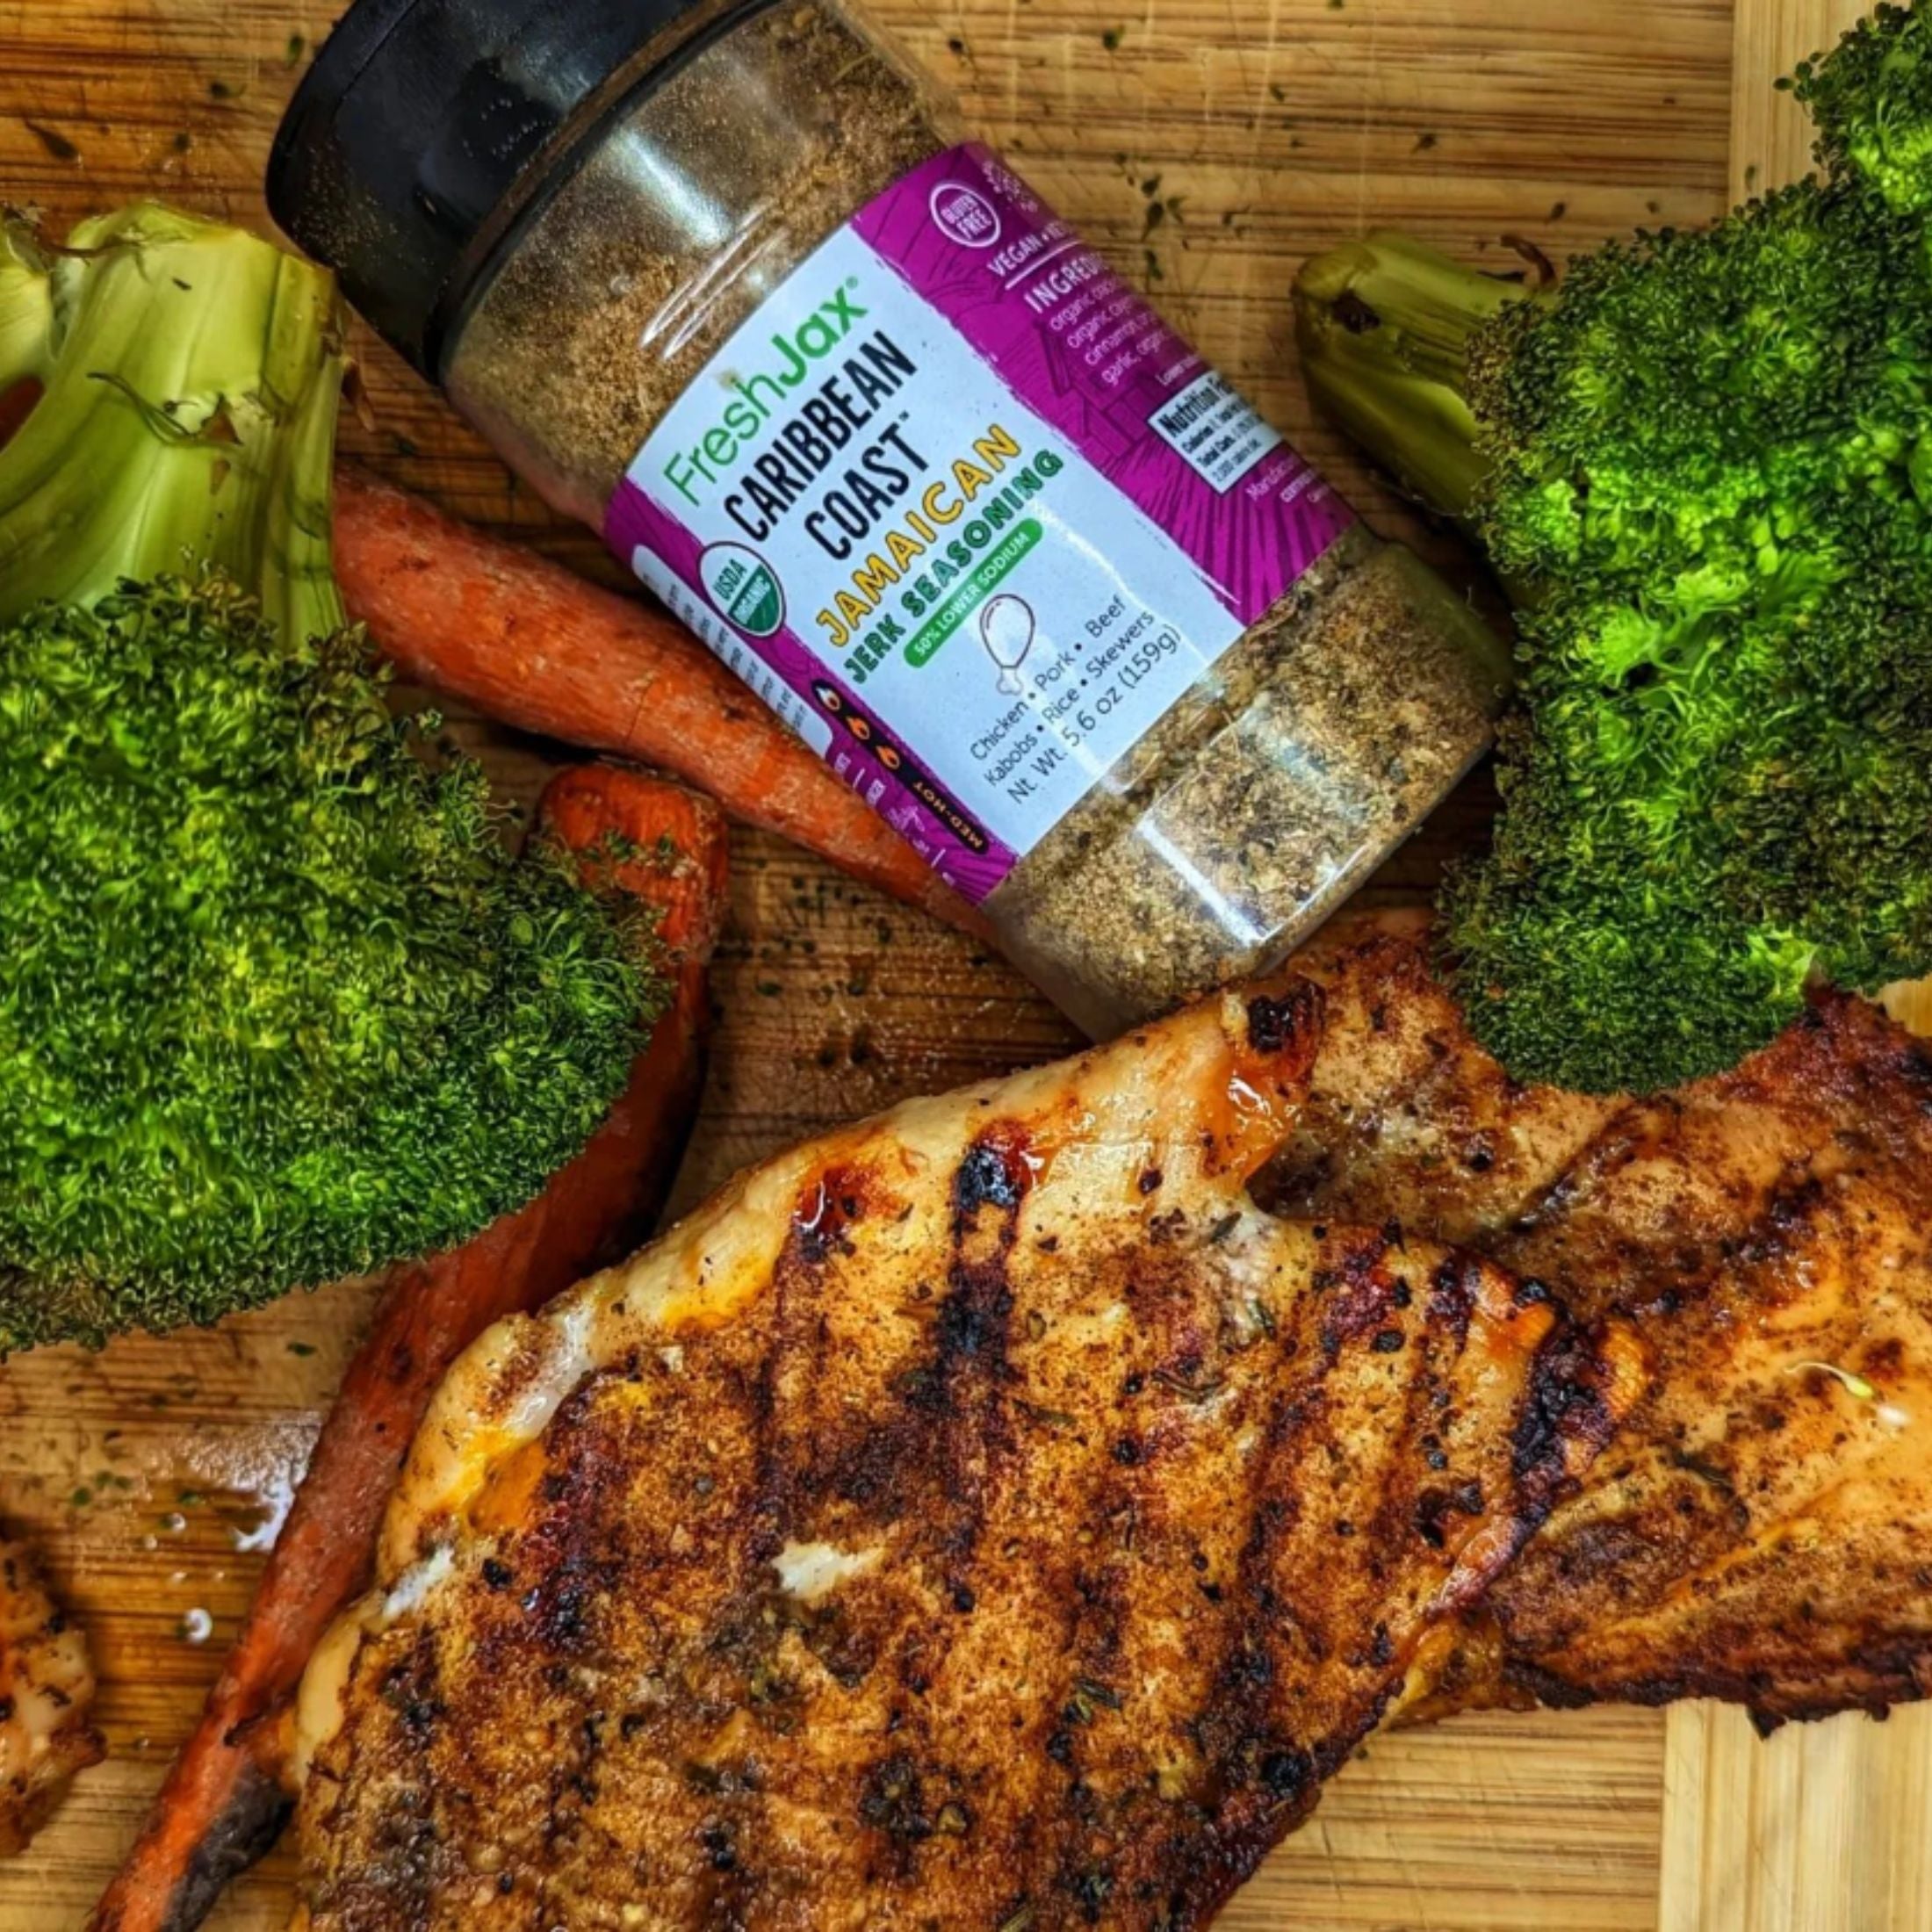 Jerk Seasoning used on grilled chicken, broccoli and carrots